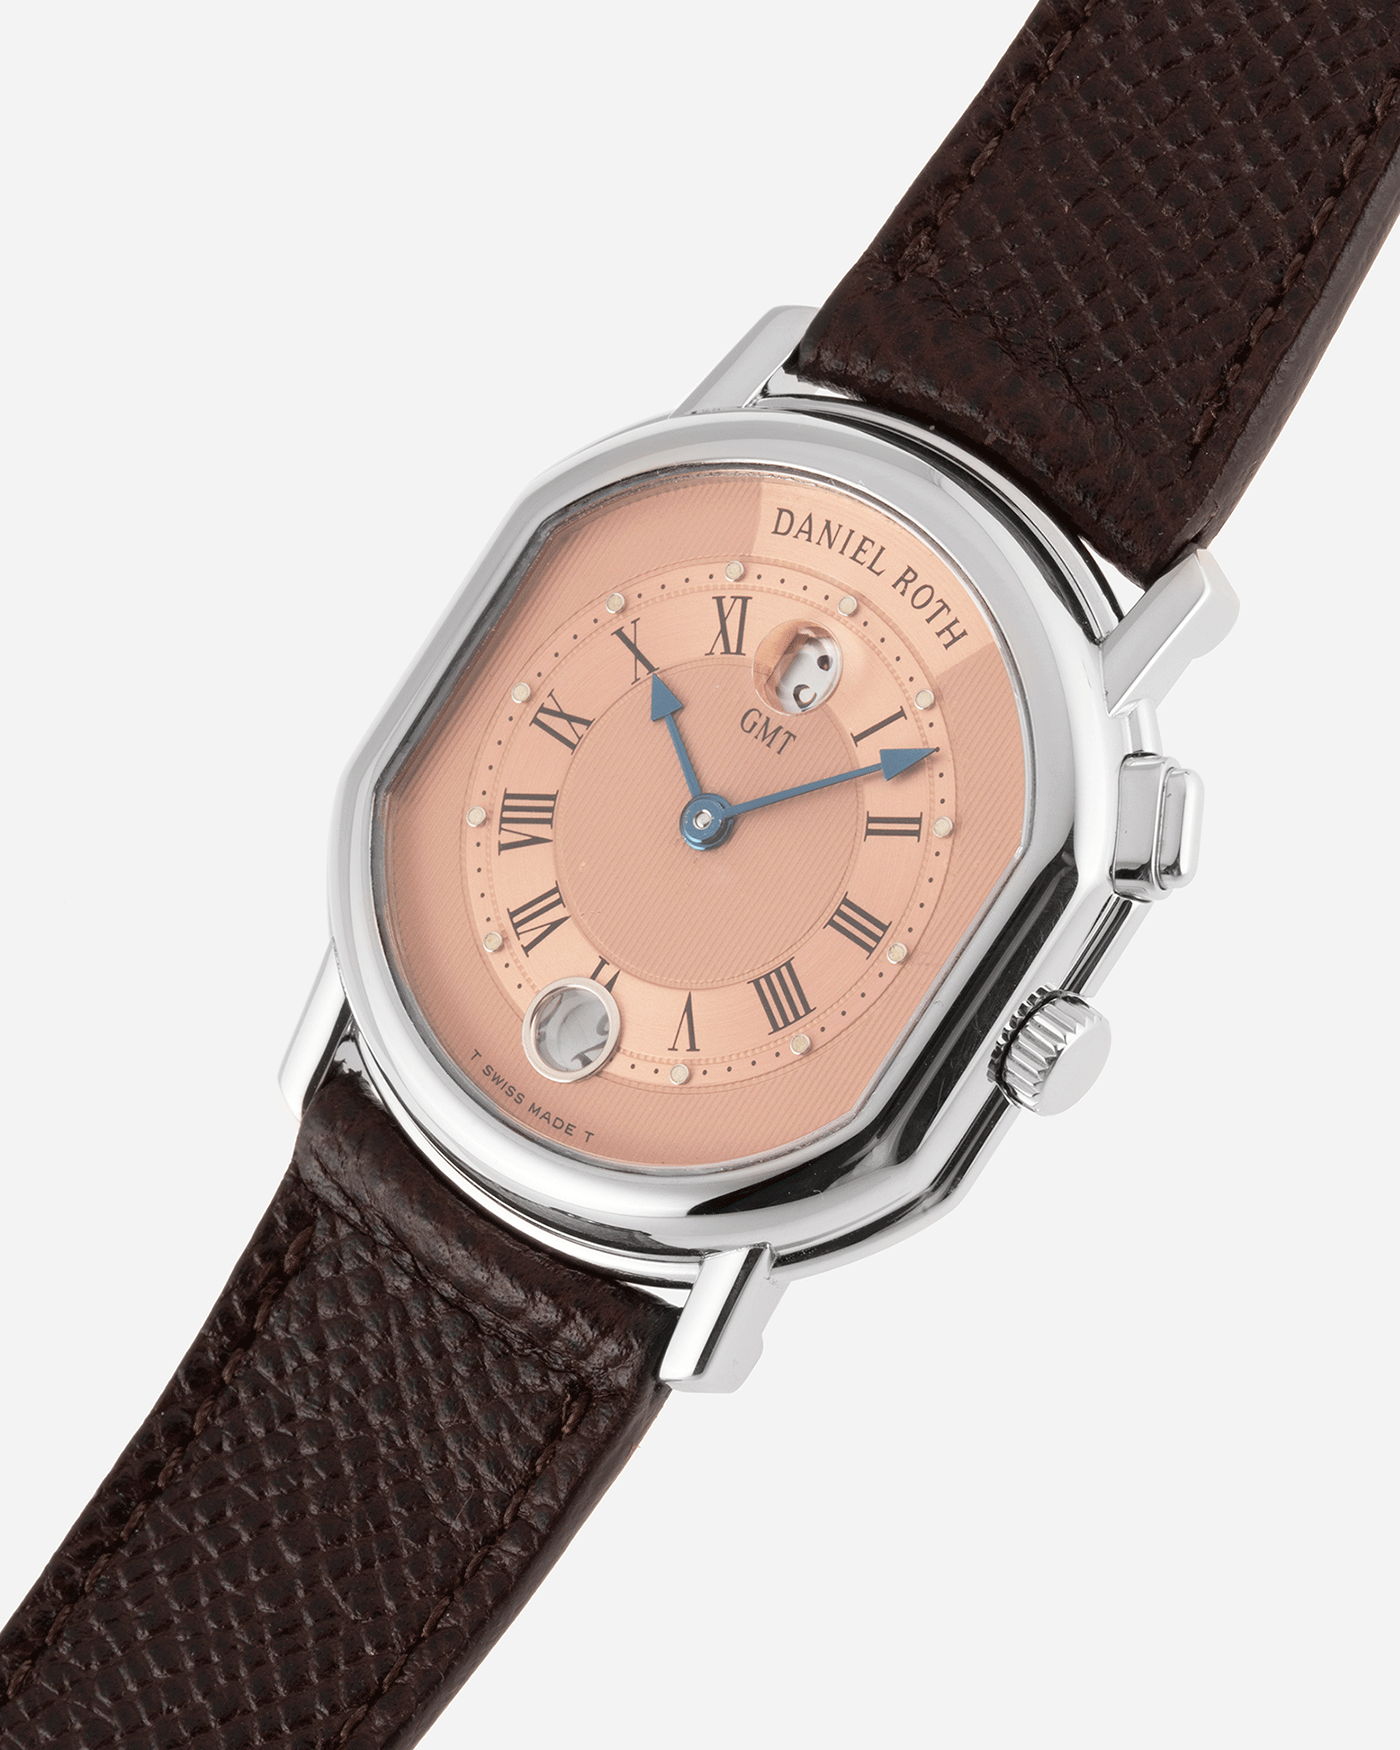 Brand: Daniel Roth Year: 1990’s Model: GMT Material: Stainless Steel Case Diameter: 35mm Strap: JPM X S.Song Dark Brown Textured Calf